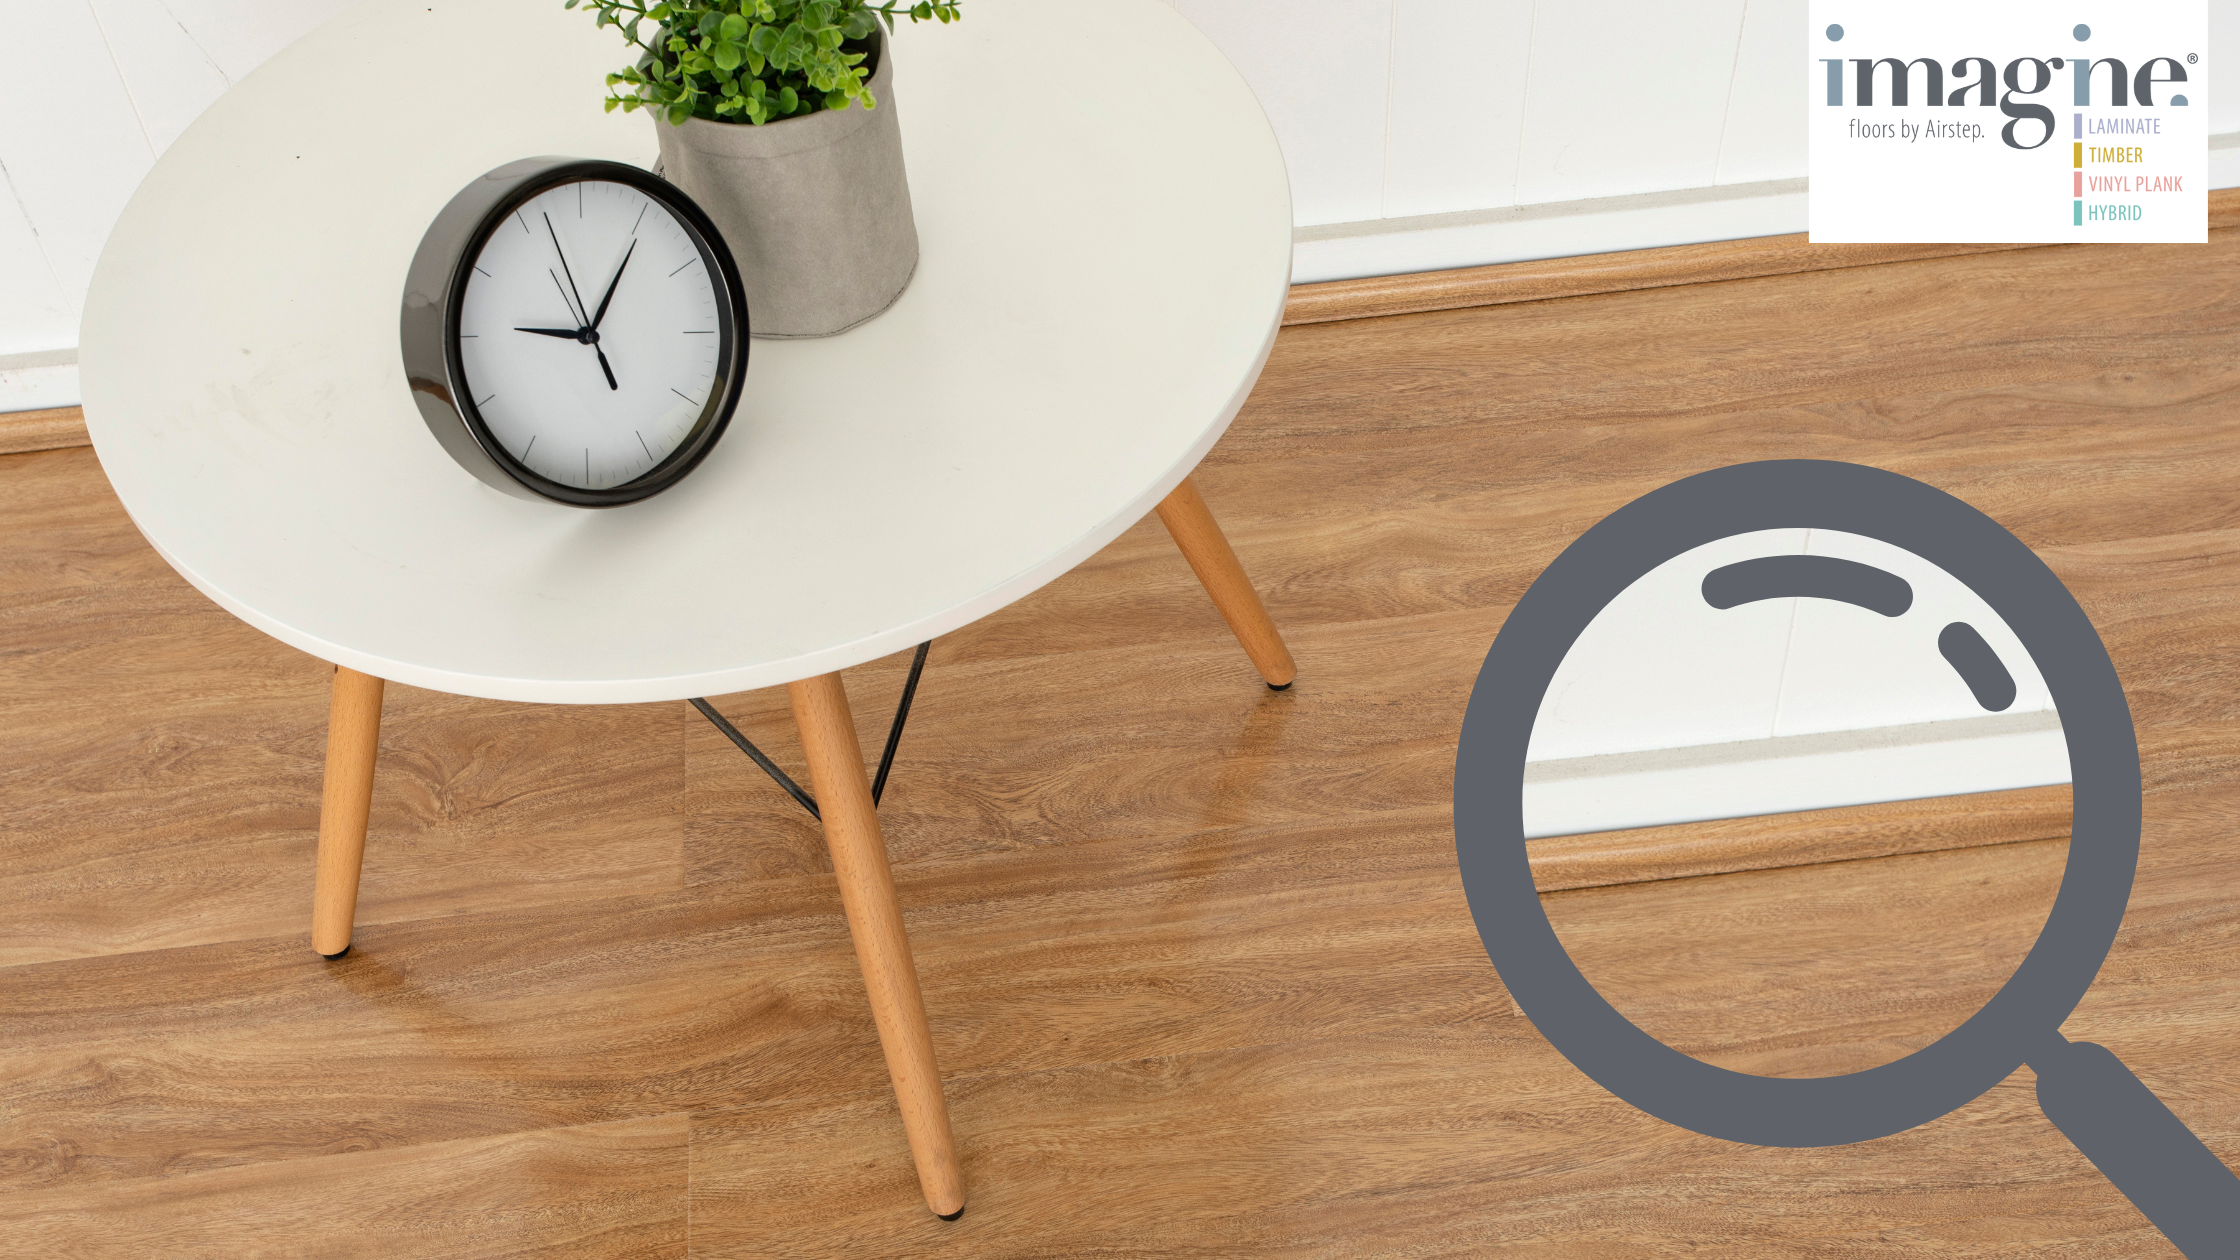 Everything you need to know about Vinyl flooring